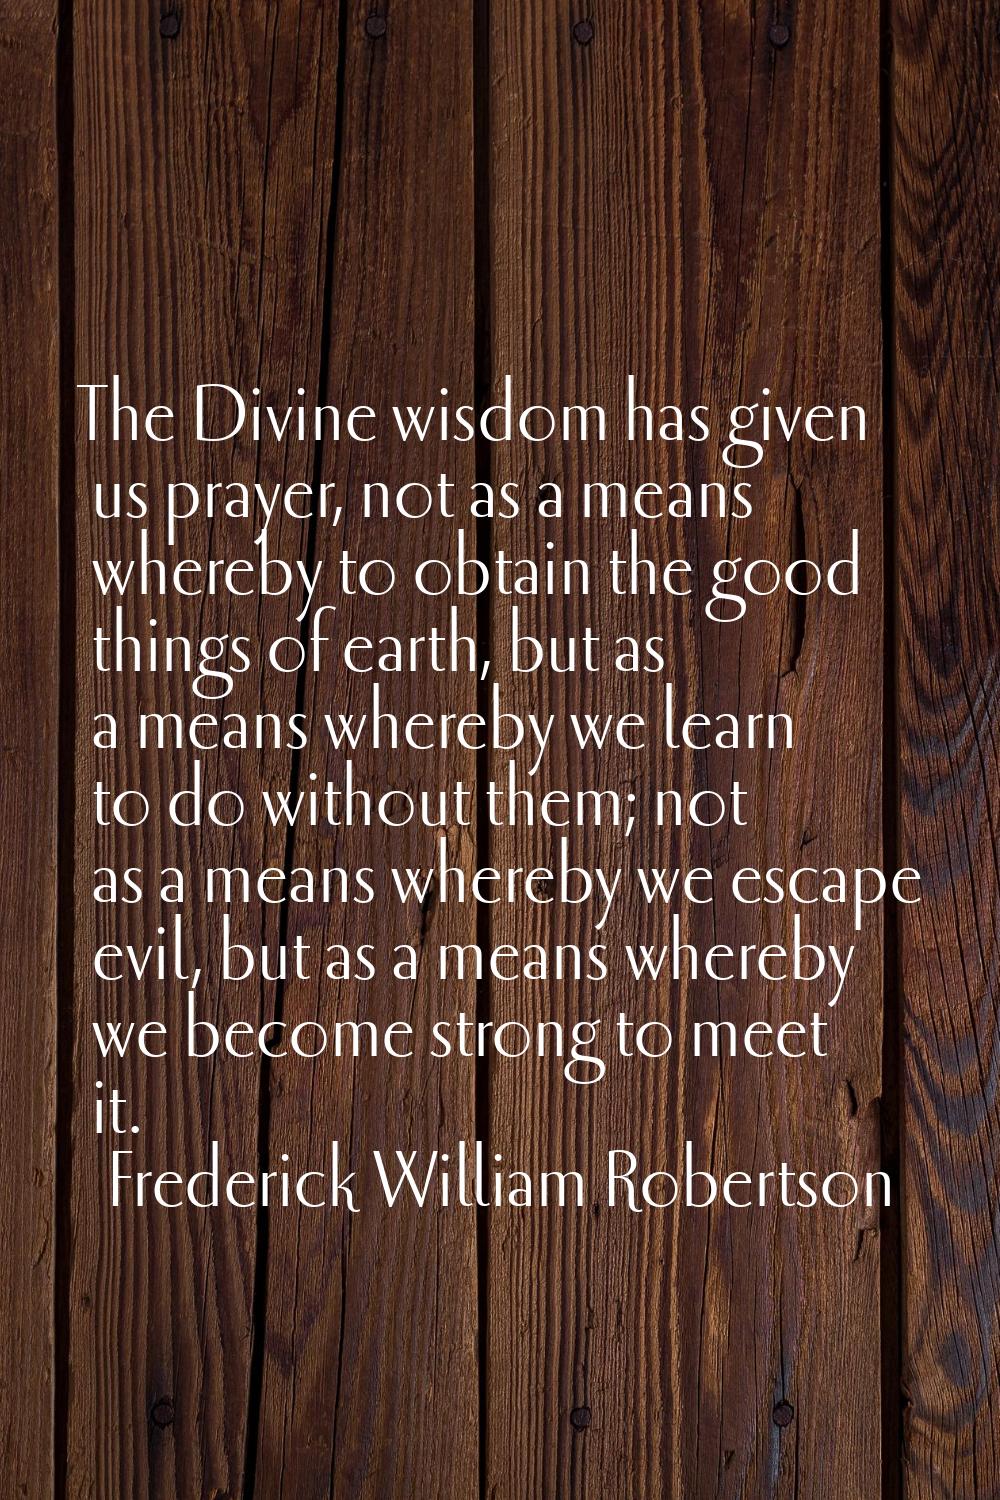 The Divine wisdom has given us prayer, not as a means whereby to obtain the good things of earth, b